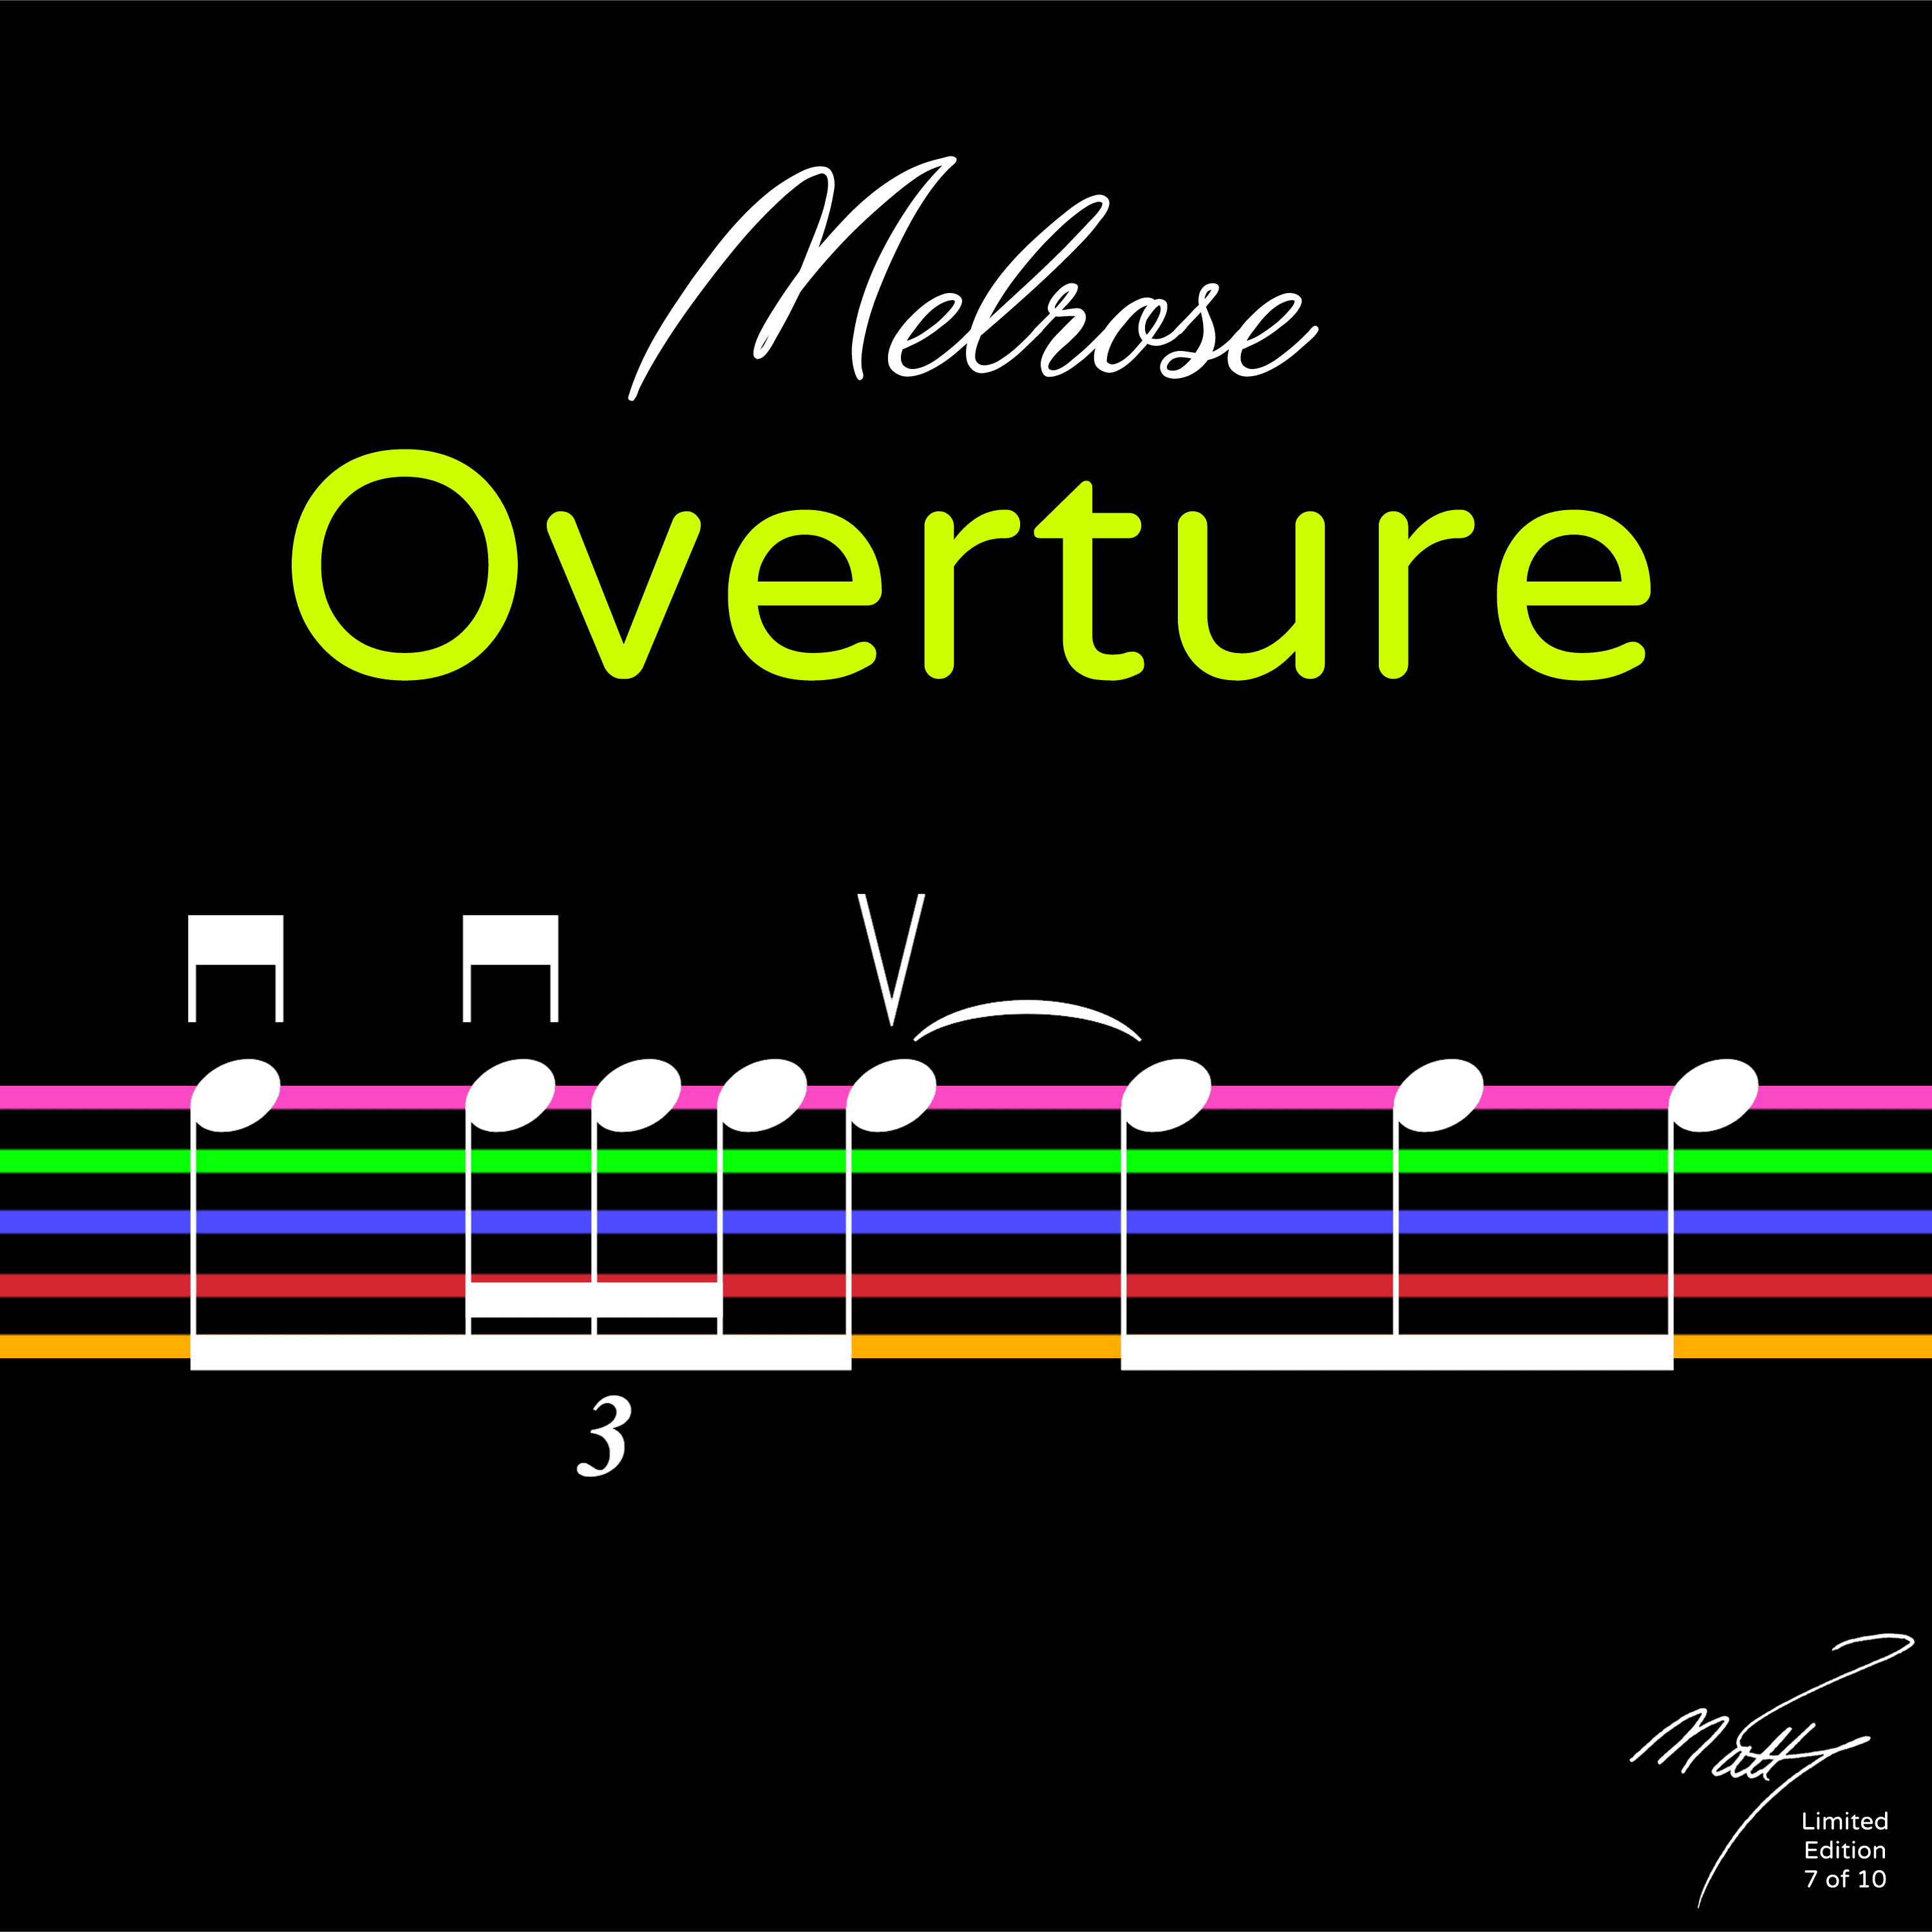 "Melrose Overture" by Matt Johnson-Autographed Limited Edition (7 of 10)